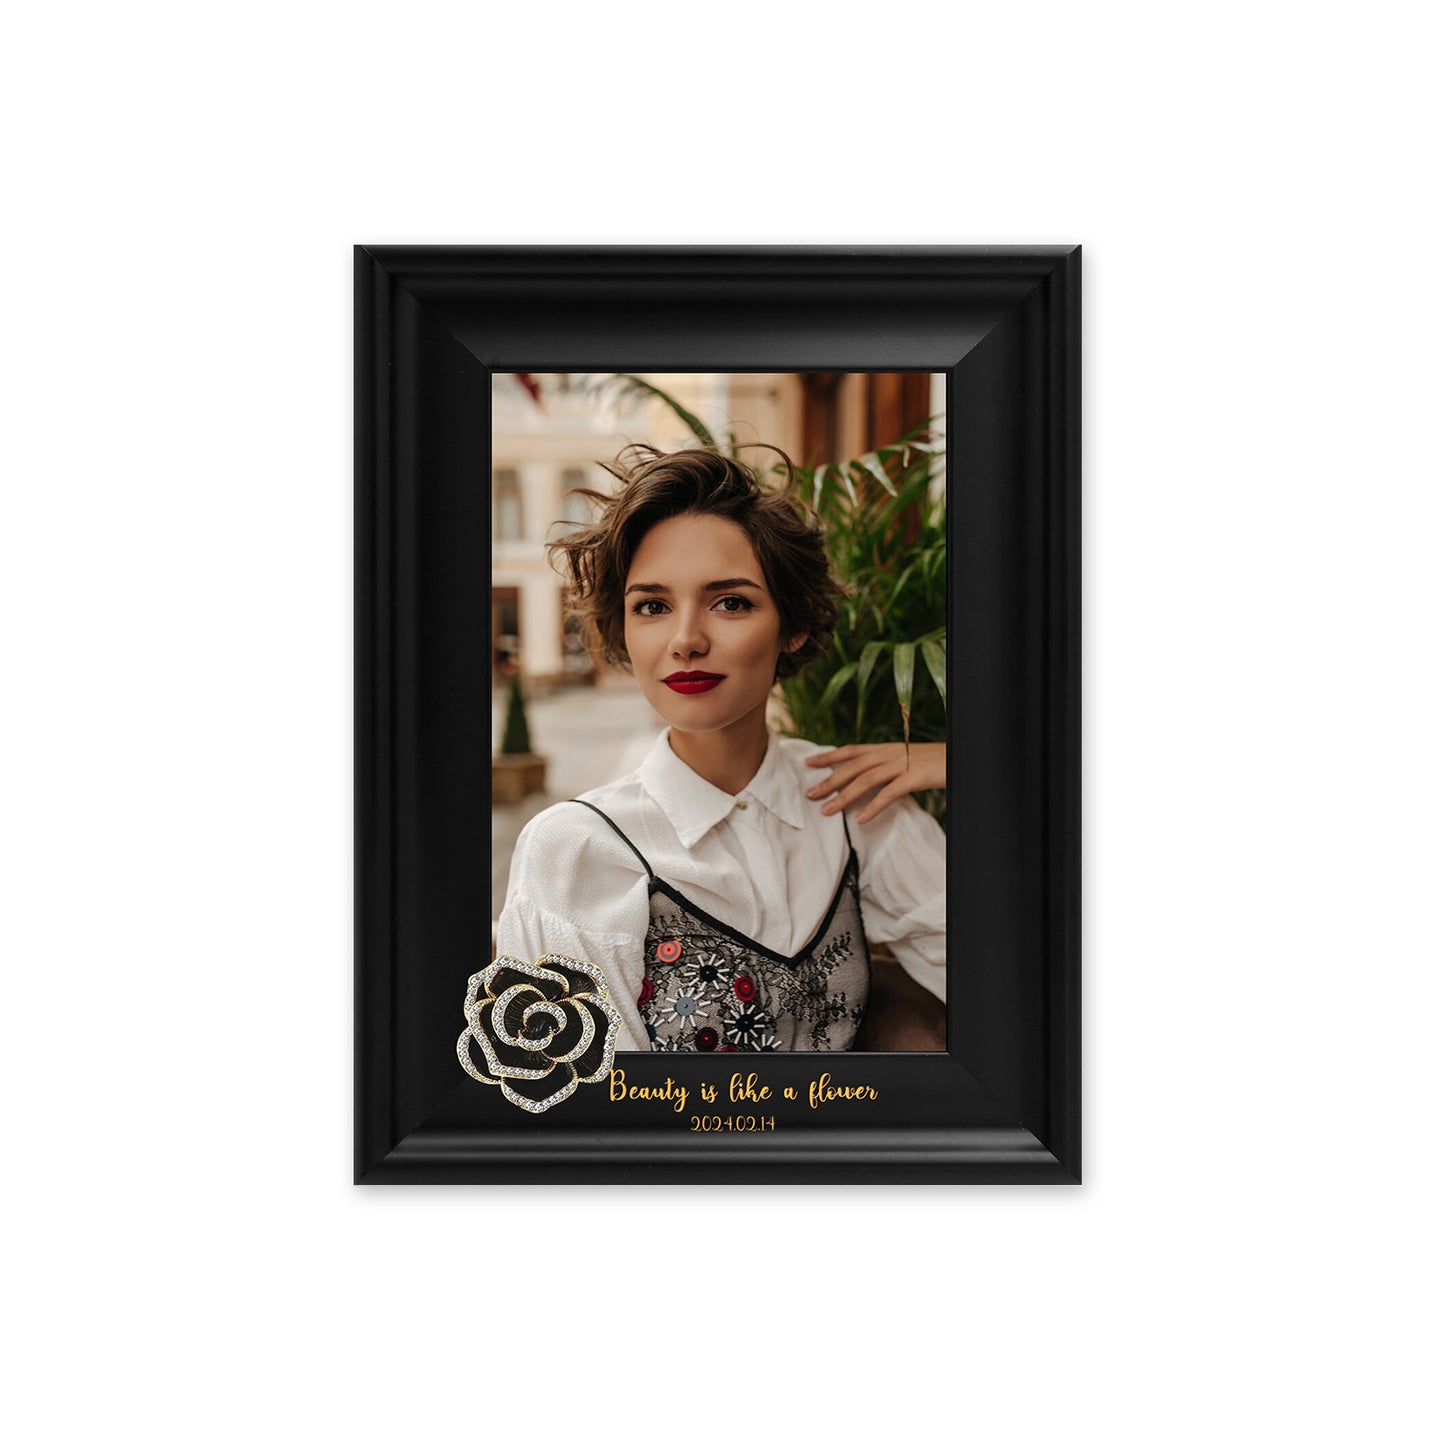 Dotride Custom Picture Frame, Wood Photo Frame with Custom Wooden Carving, Can be engraved with any text you want, suitable for Suitable for Various Themes, Black Flower